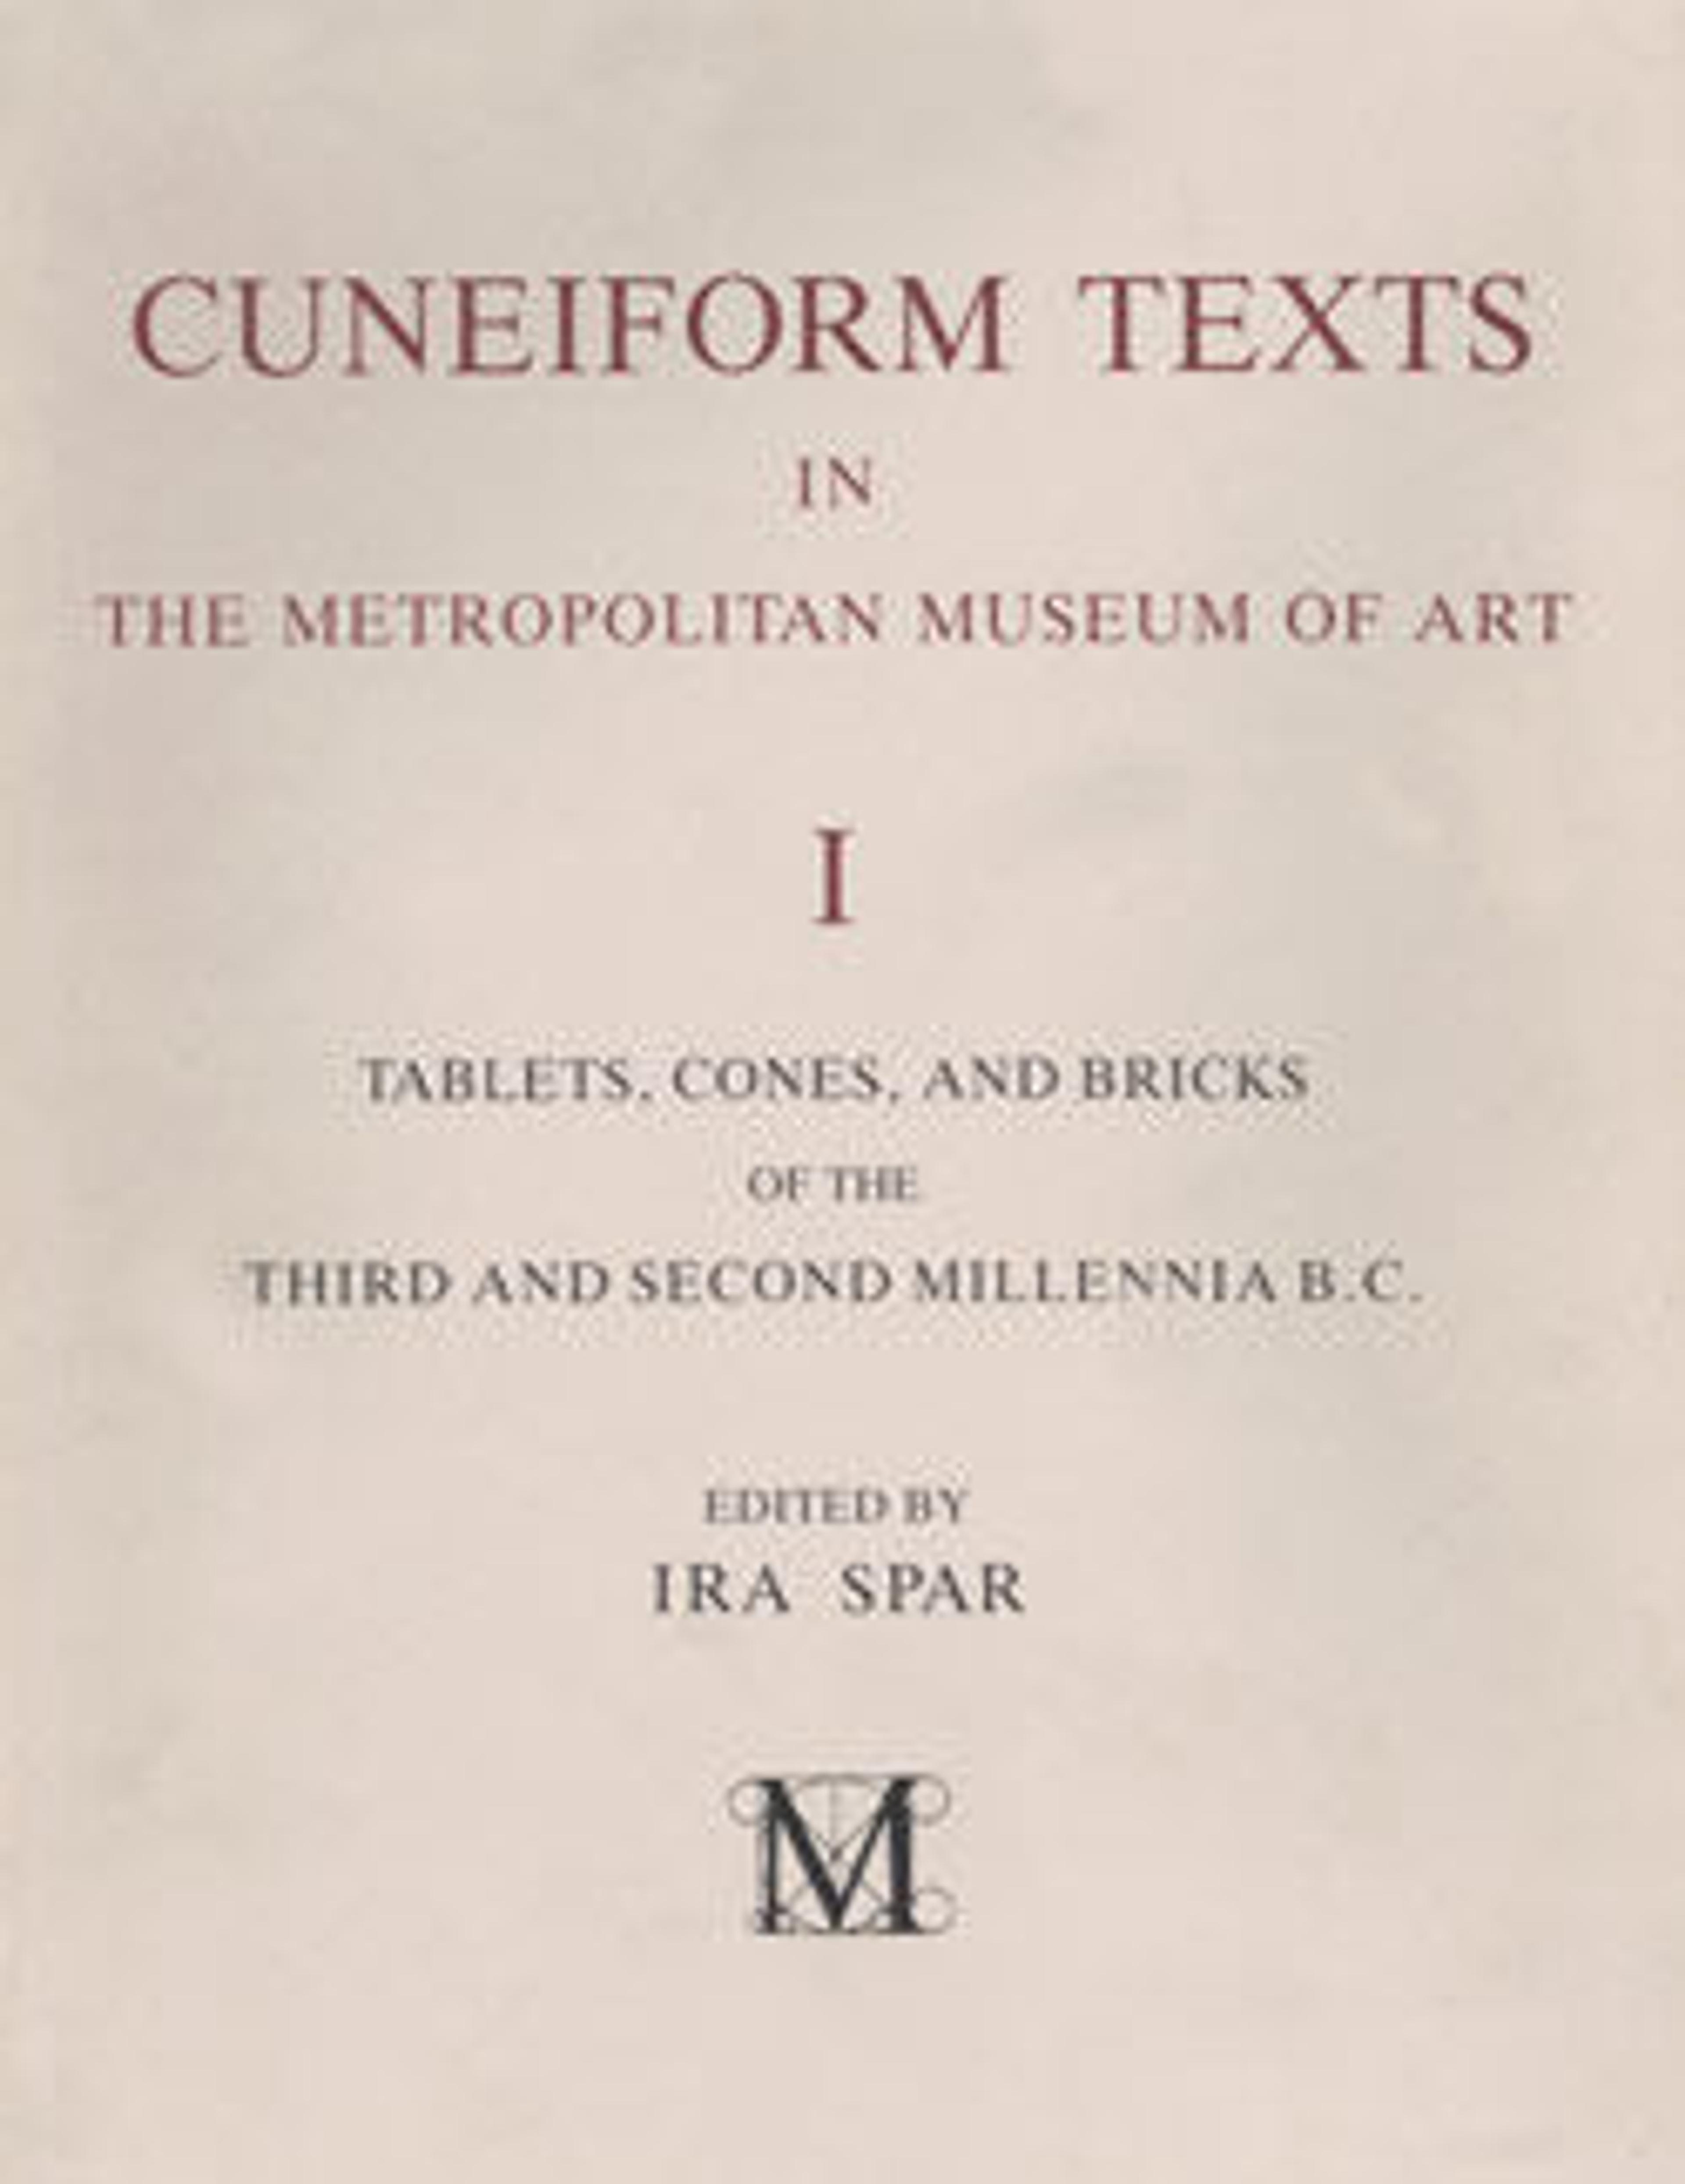 Cuneiform Texts in The Metropolitan Museum of Art. Volume I: Tablets, Cones, and Bricks of the Third and Second Millennia B.C.